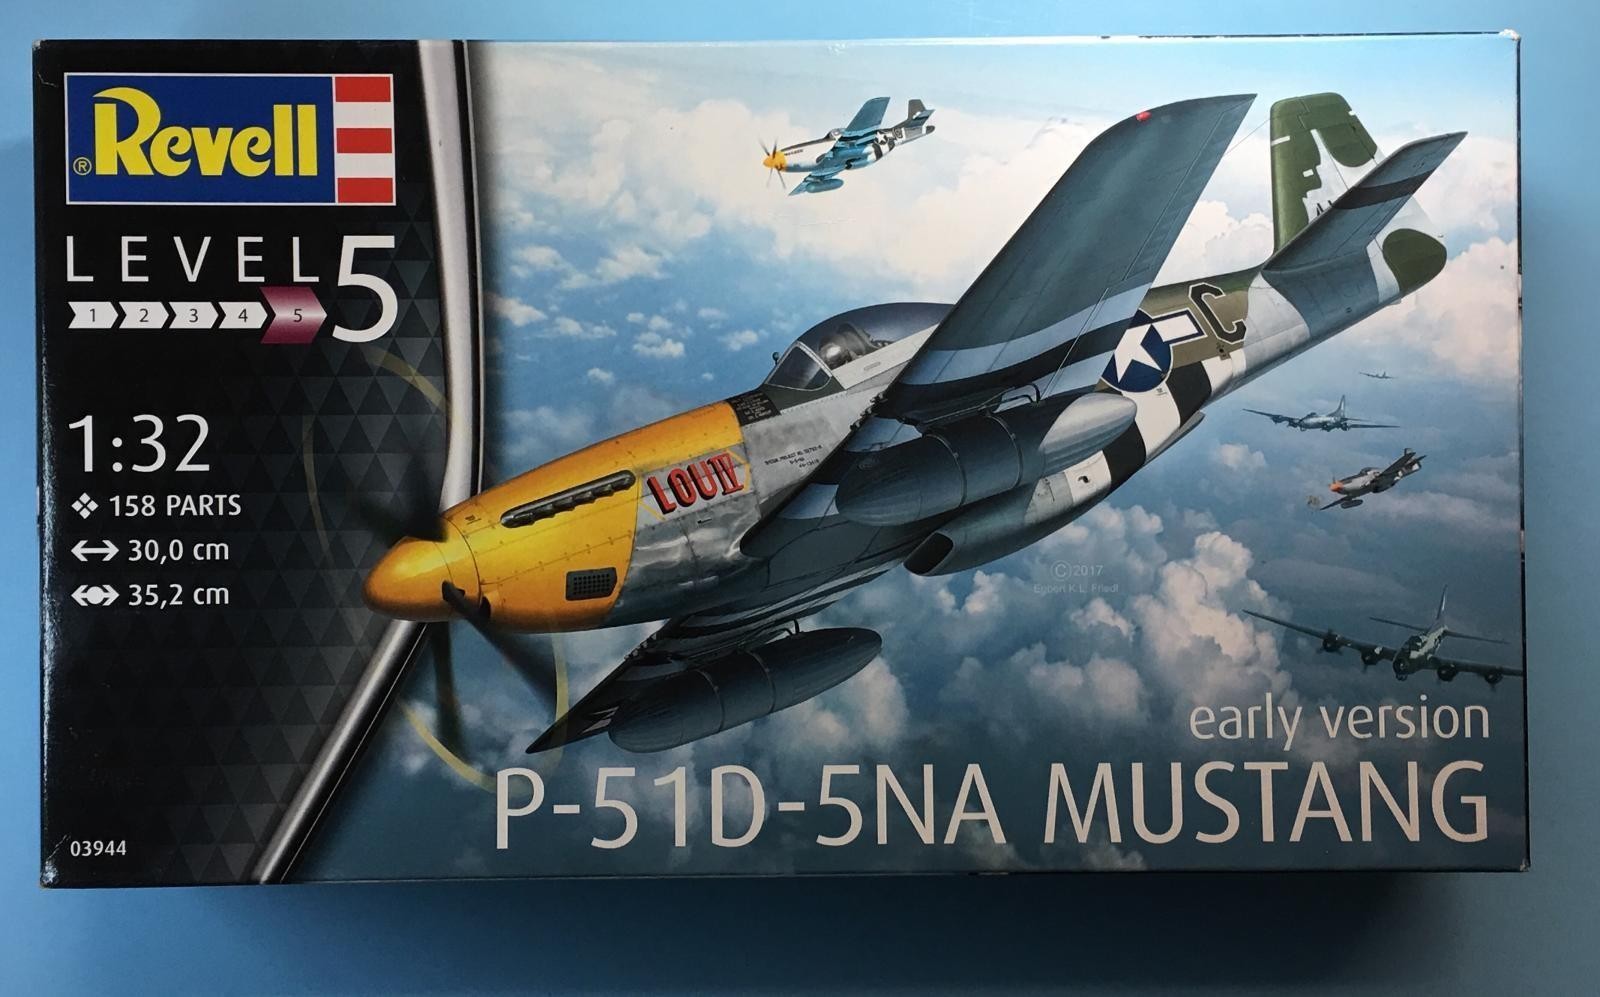 REVELL P-51D-5NA EARLY MUSTANG 85-5989 *PARTS* WING SPARS+GEAR DOORS+MORE 1/32